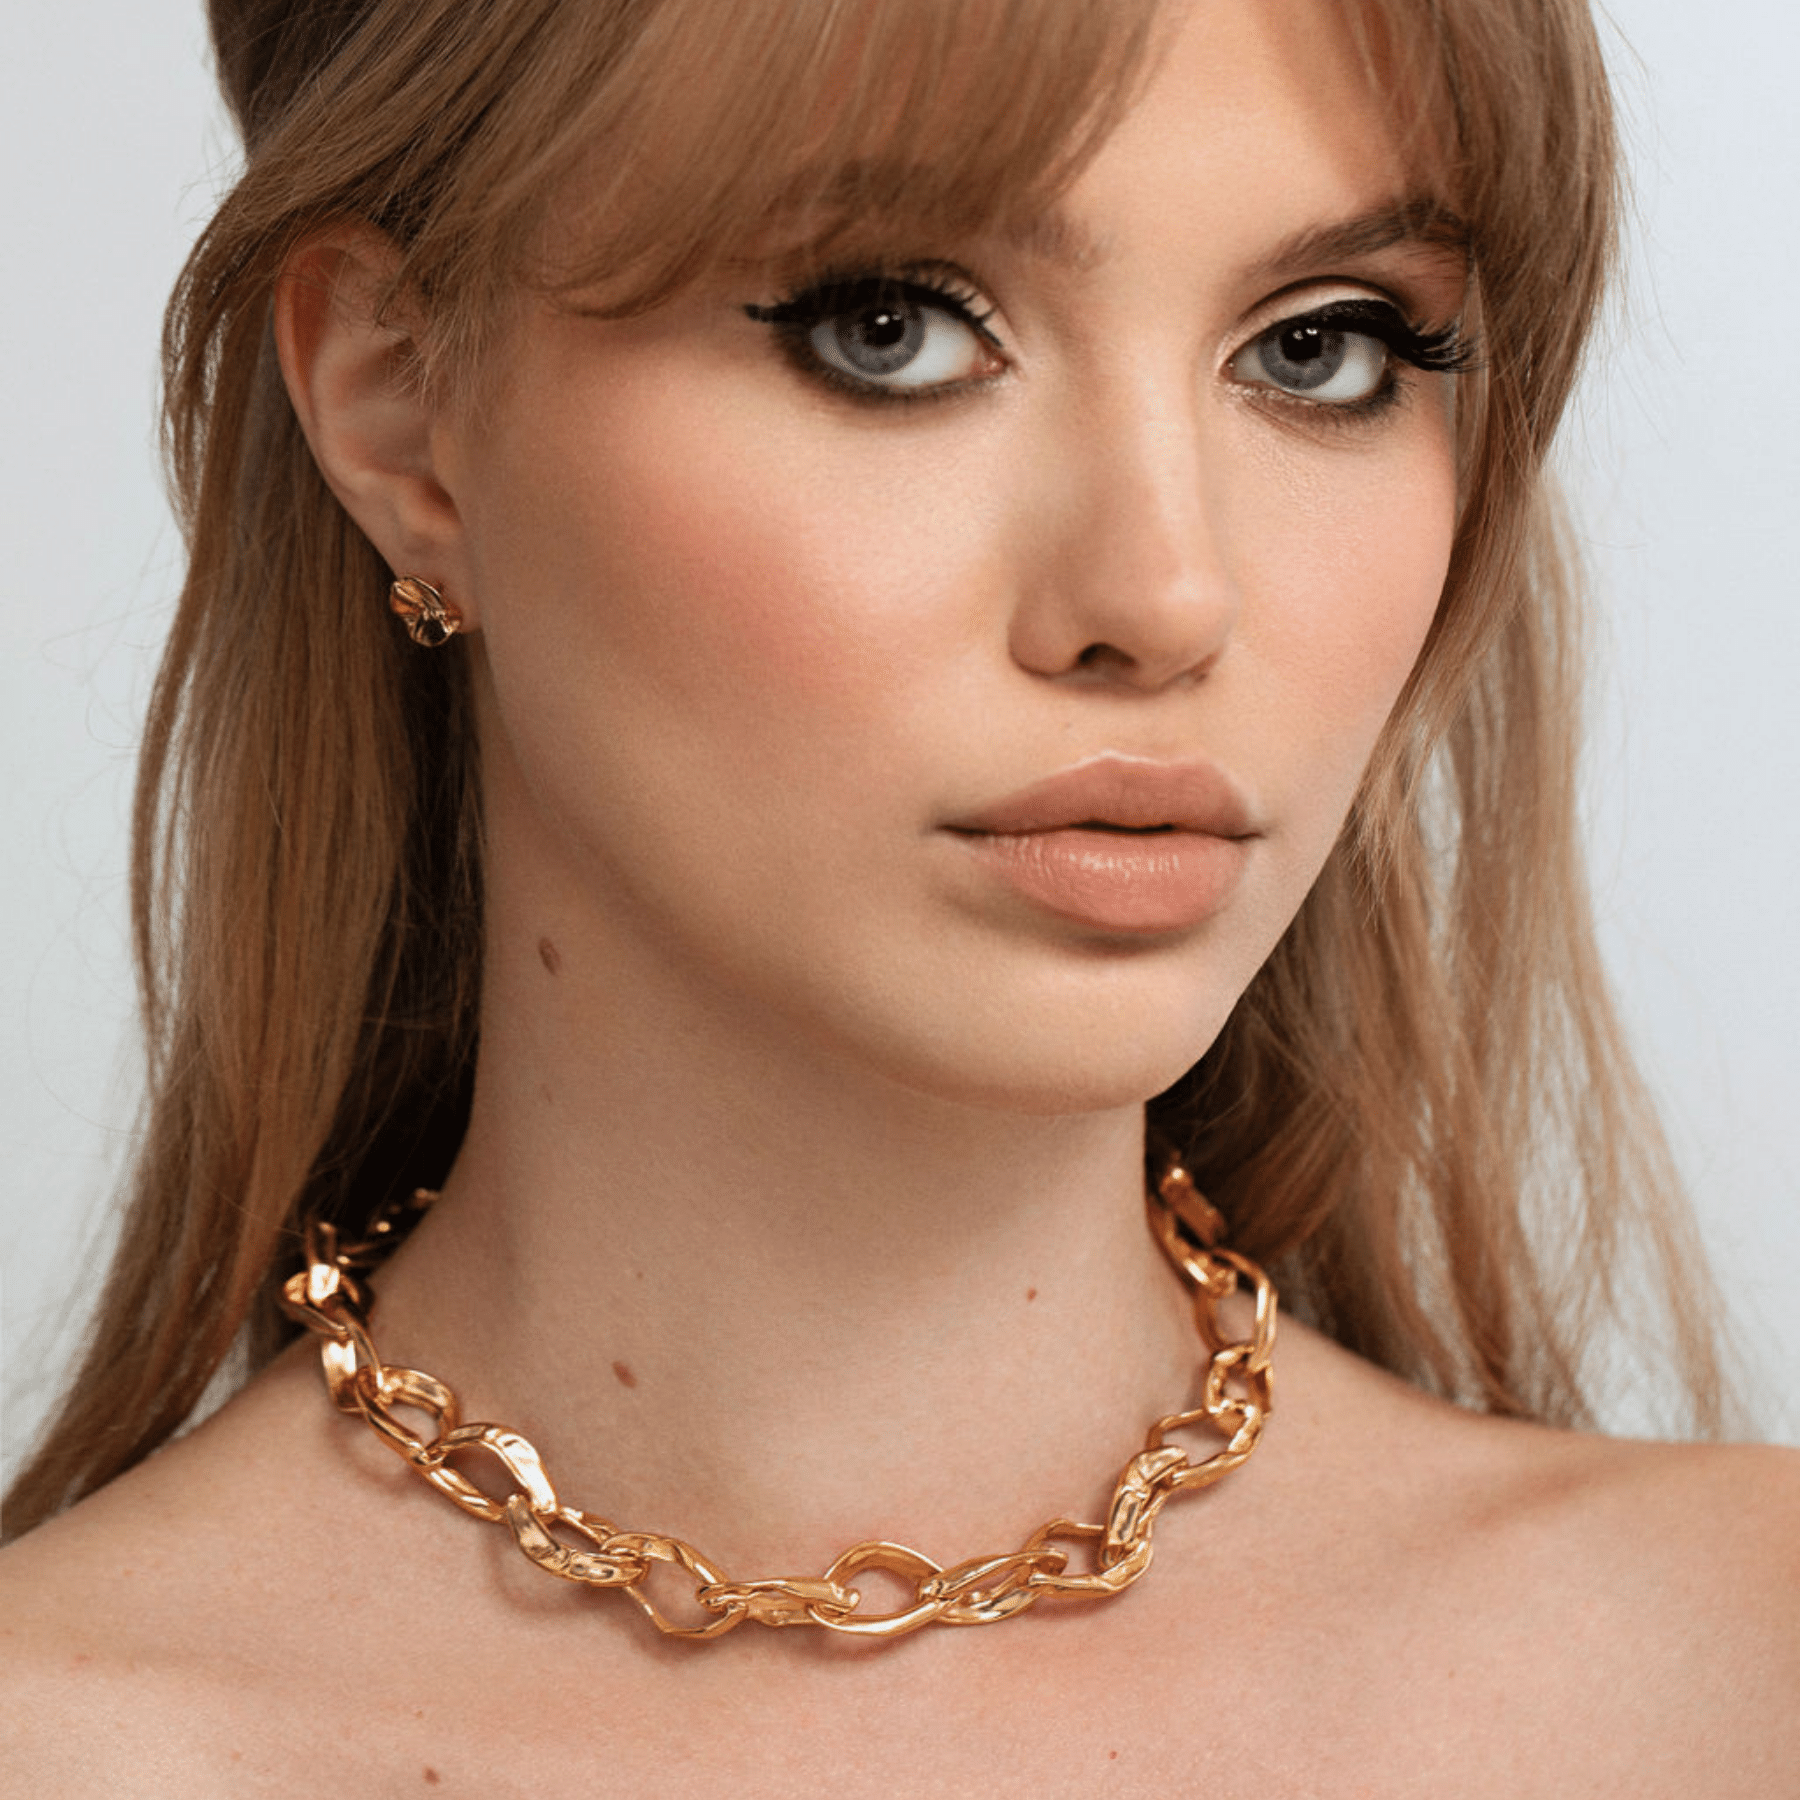 Abstract chunky gold chain statement choker necklace with toggle clasp in 18k gold vermeil.